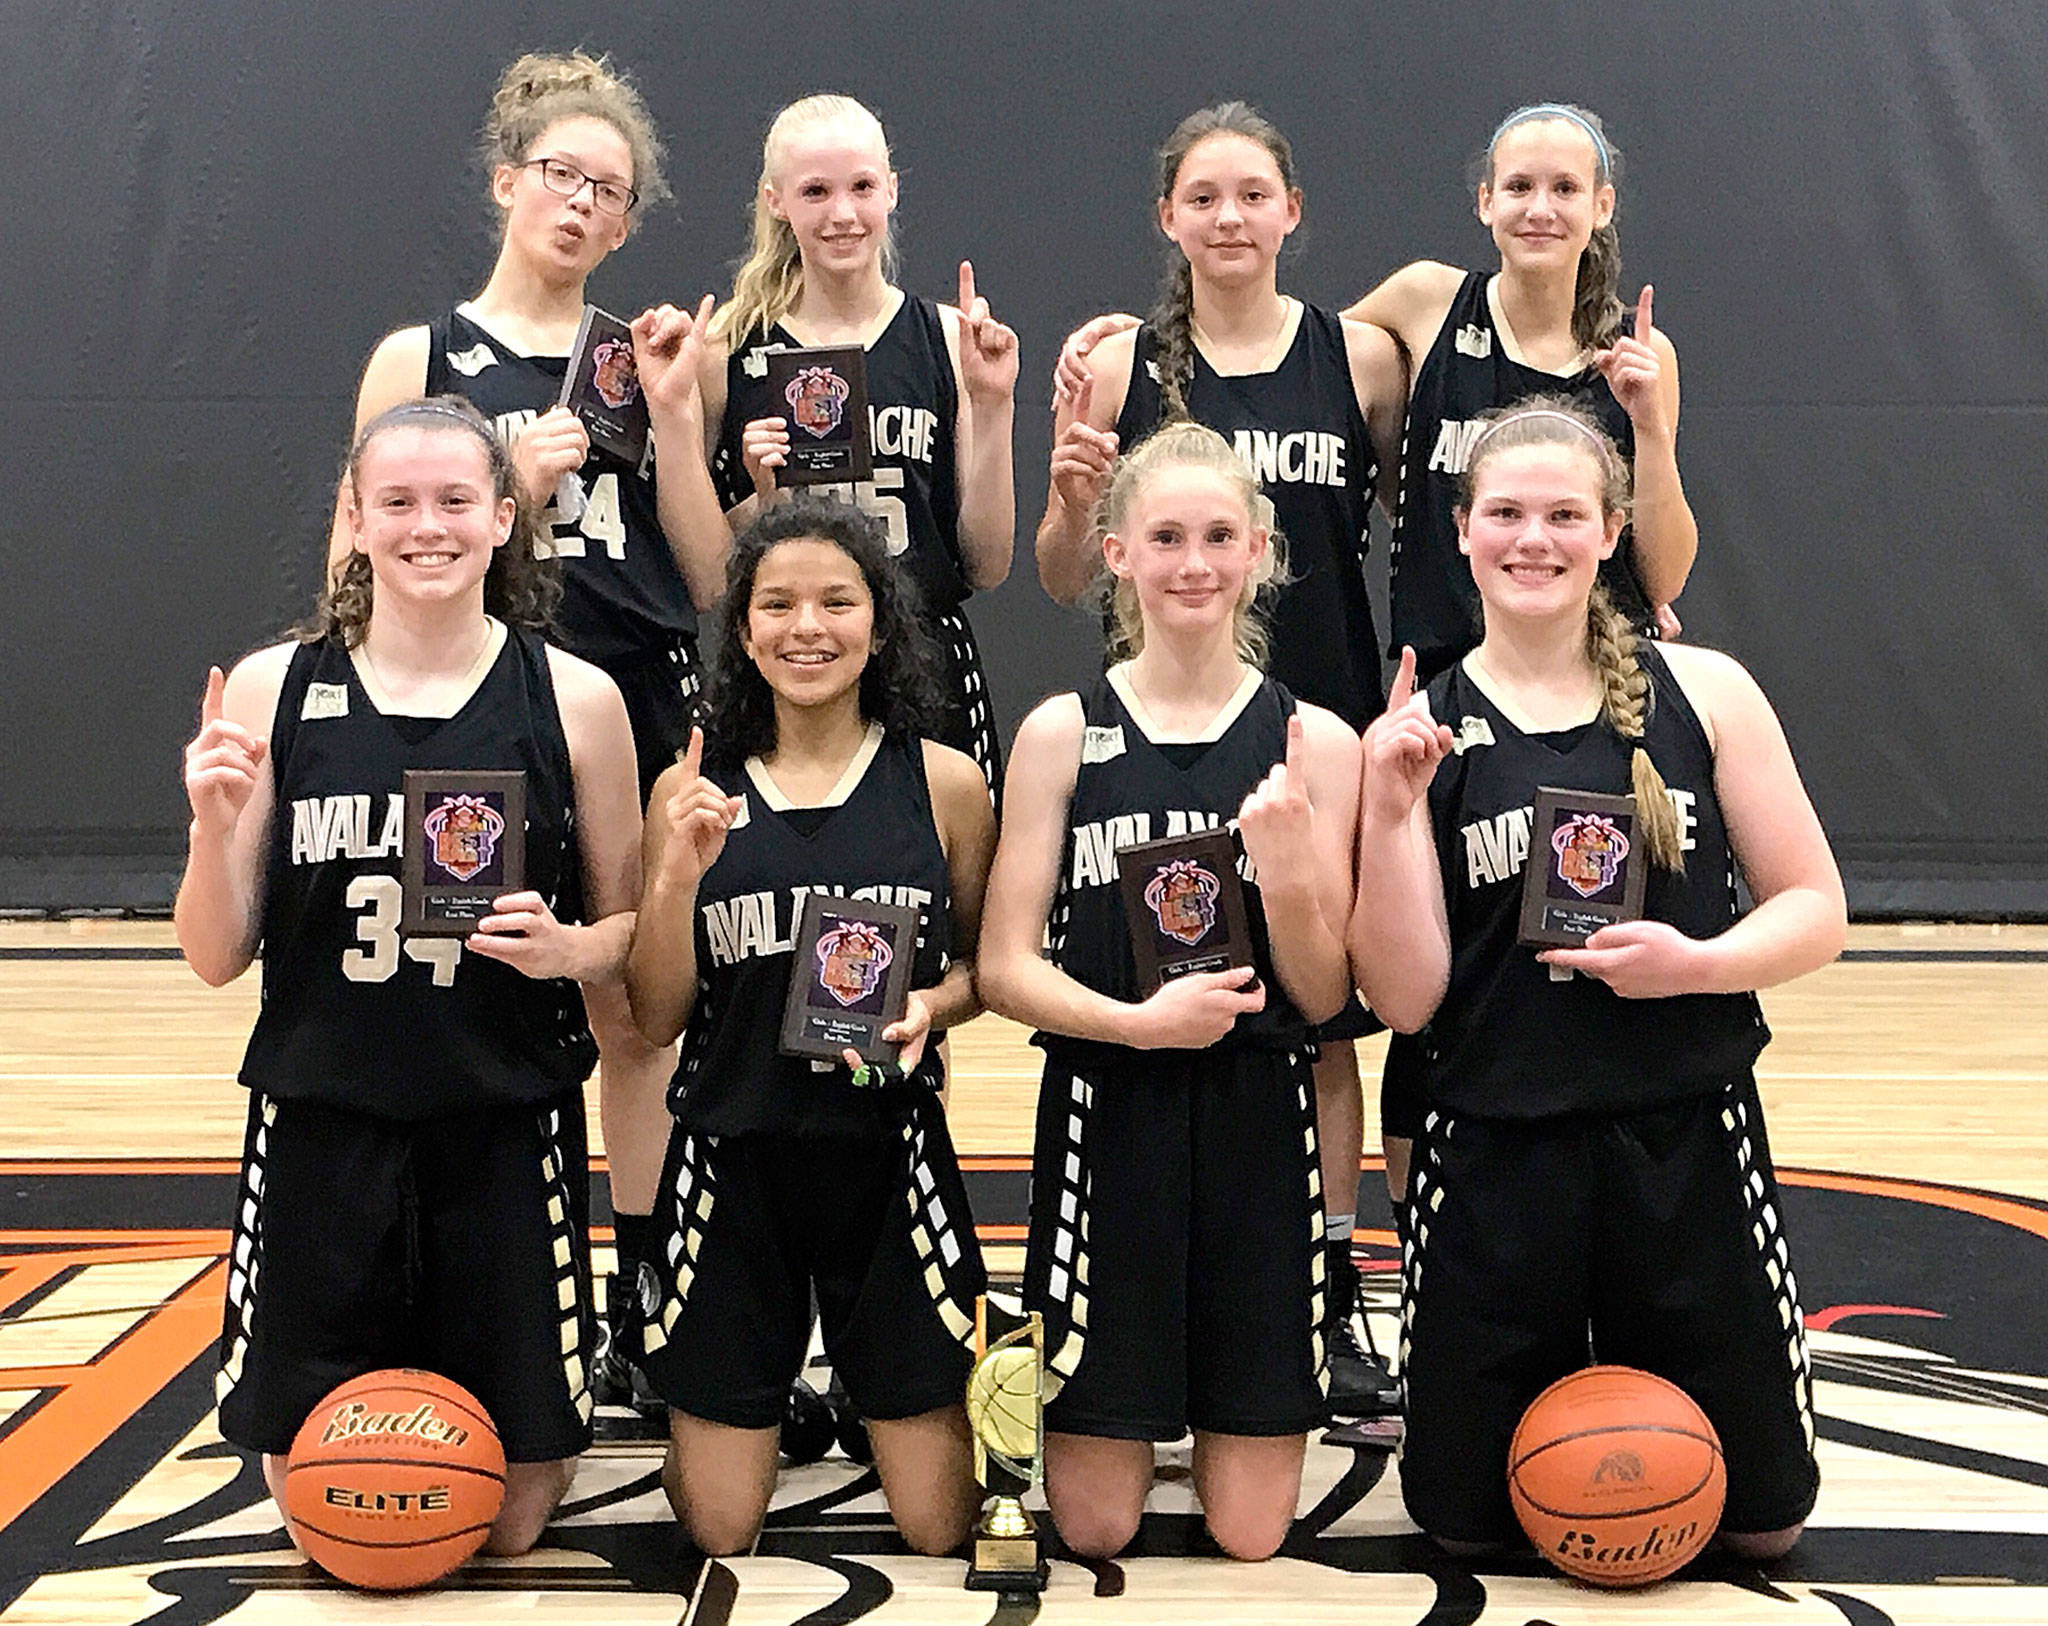 The Next Door Gastropub Olympic Avalanche Black celebrate winning the prestigious Best in the West tournament in Yakima this weekend, featuring some of the top AAU girls’ teams from around the Pacific Northwest. The Avalanche won seven straight games at the tourney. From left back row, are Madison Cooke, Maggie Ruddell, Jada Cargo-Acosta and Hannah Reetz. From left, front row, Jaida Wood, Camille Stensgard, Emilia Long and Myra Walker.